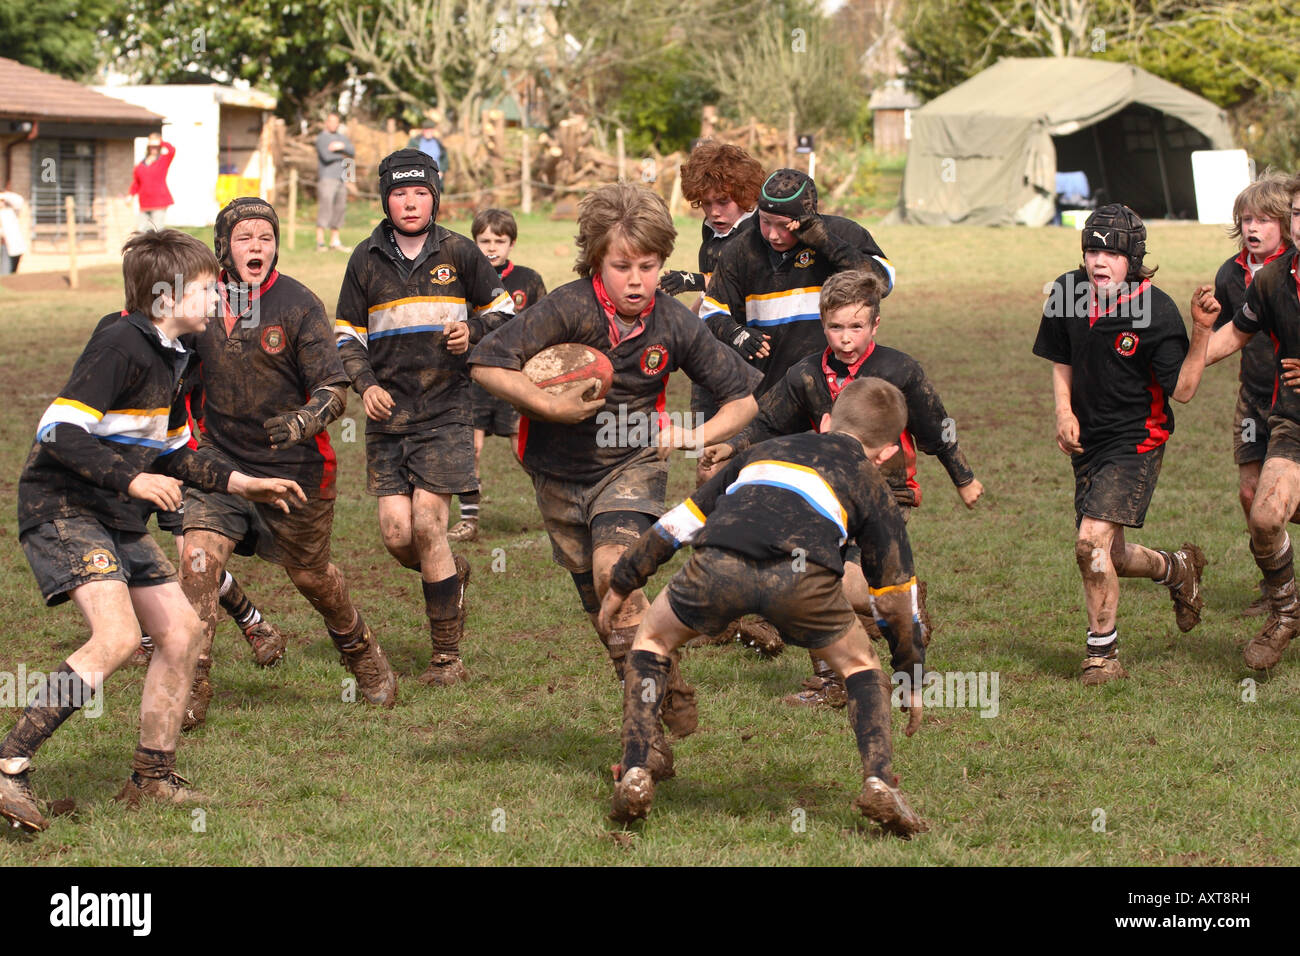 Junior rugby match Under 12 players compete in local team game in Somerset England  EDITORIAL USE ONLY Stock Photo